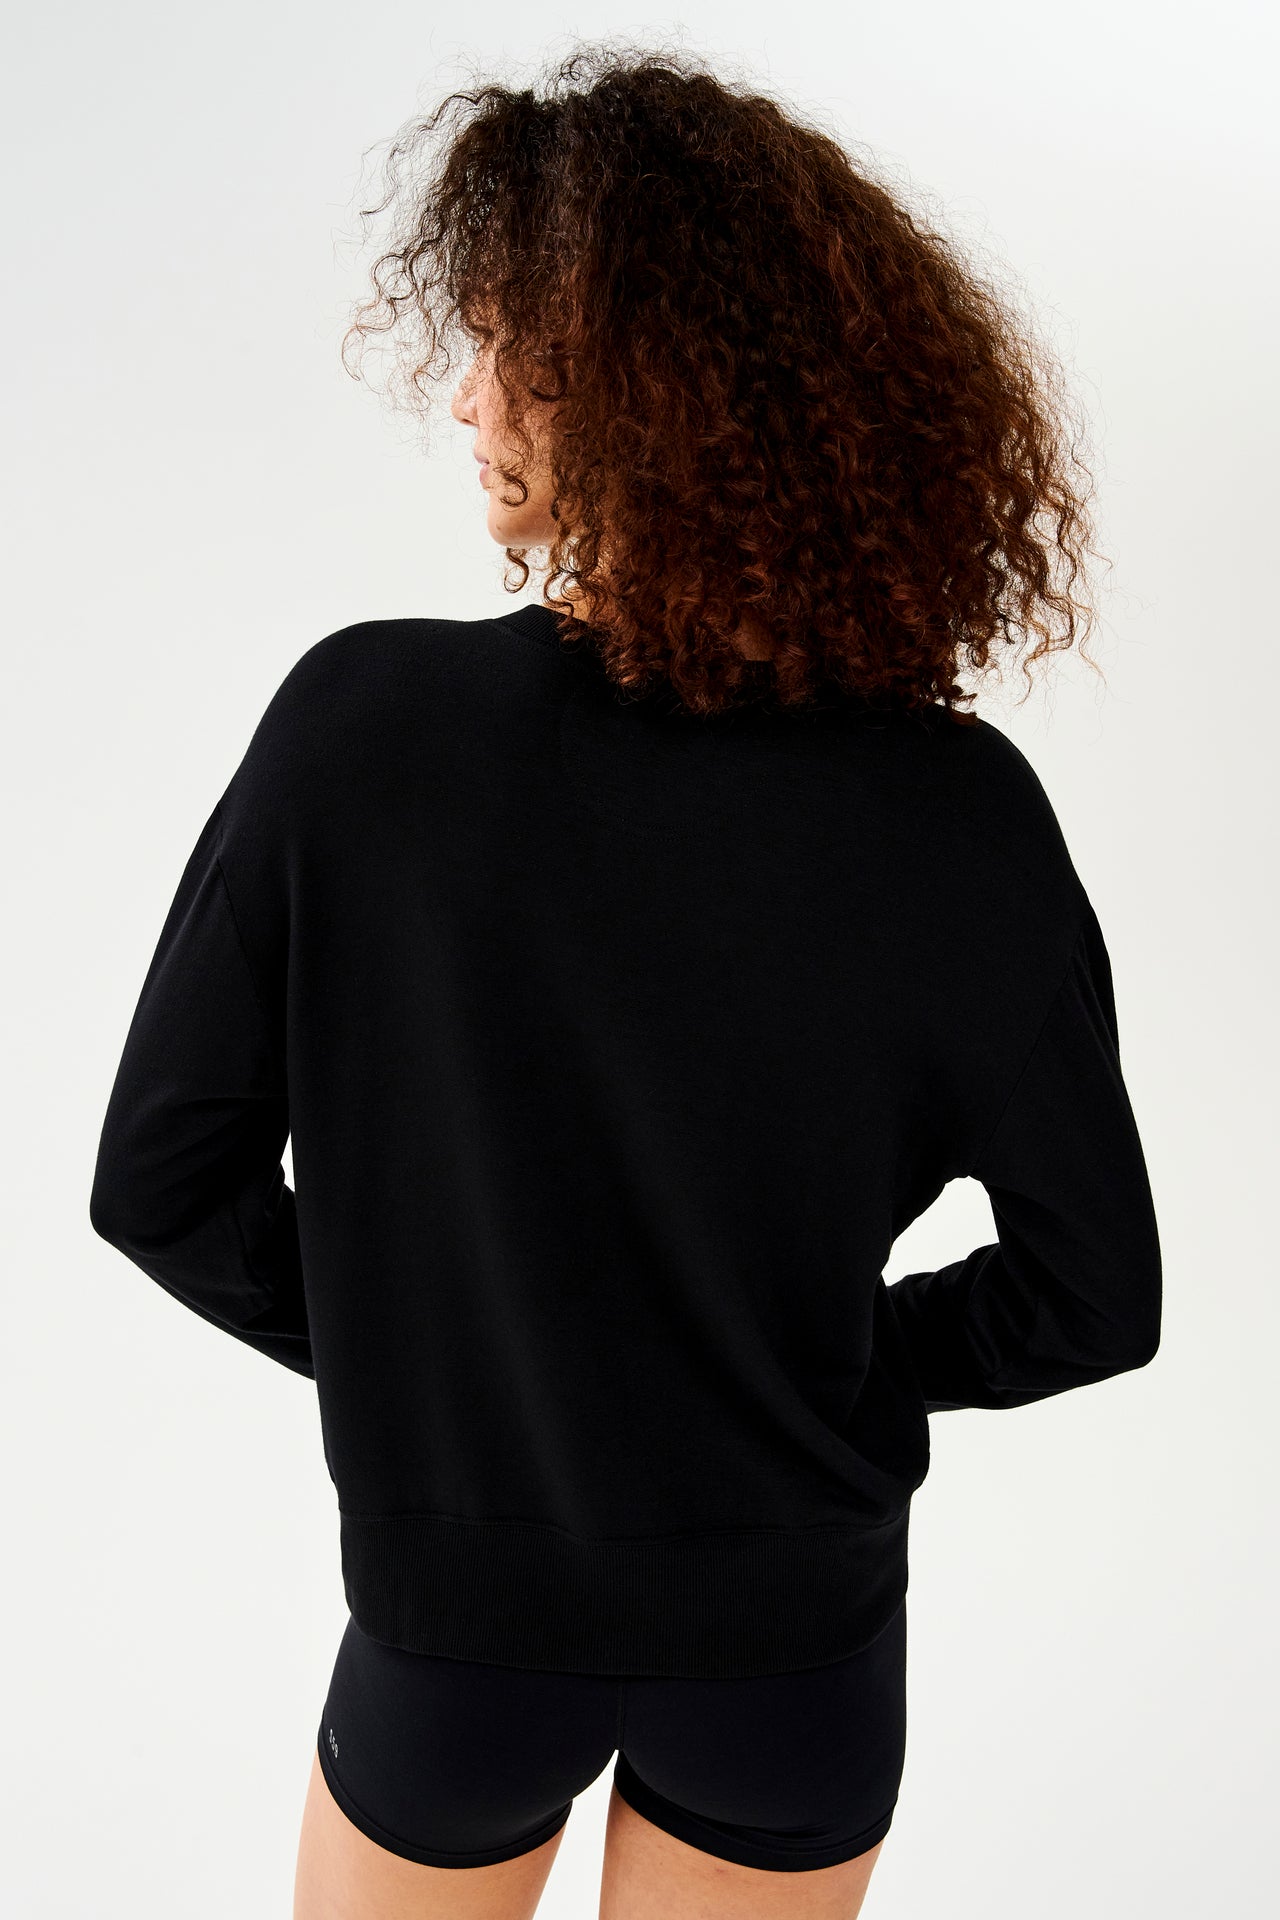 Back view of woman with curly dark brown hair wearing a black crewneck sweatshirt and black shorts